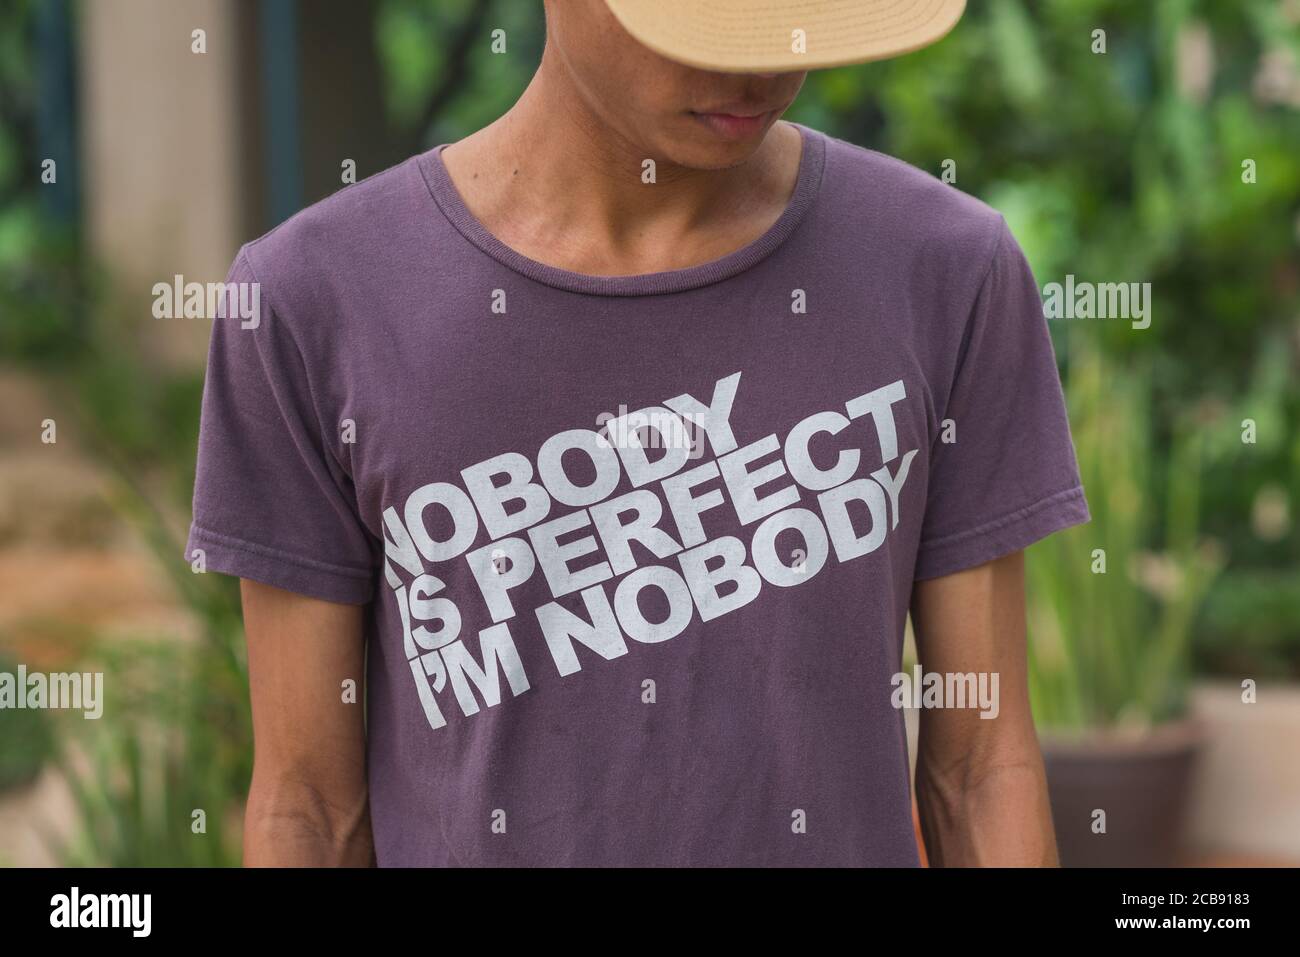 Young man wearing a t-shirt with an inscription saying 'Nobody is Perfect, I'm Nobody'. Stock image. Stock Photo